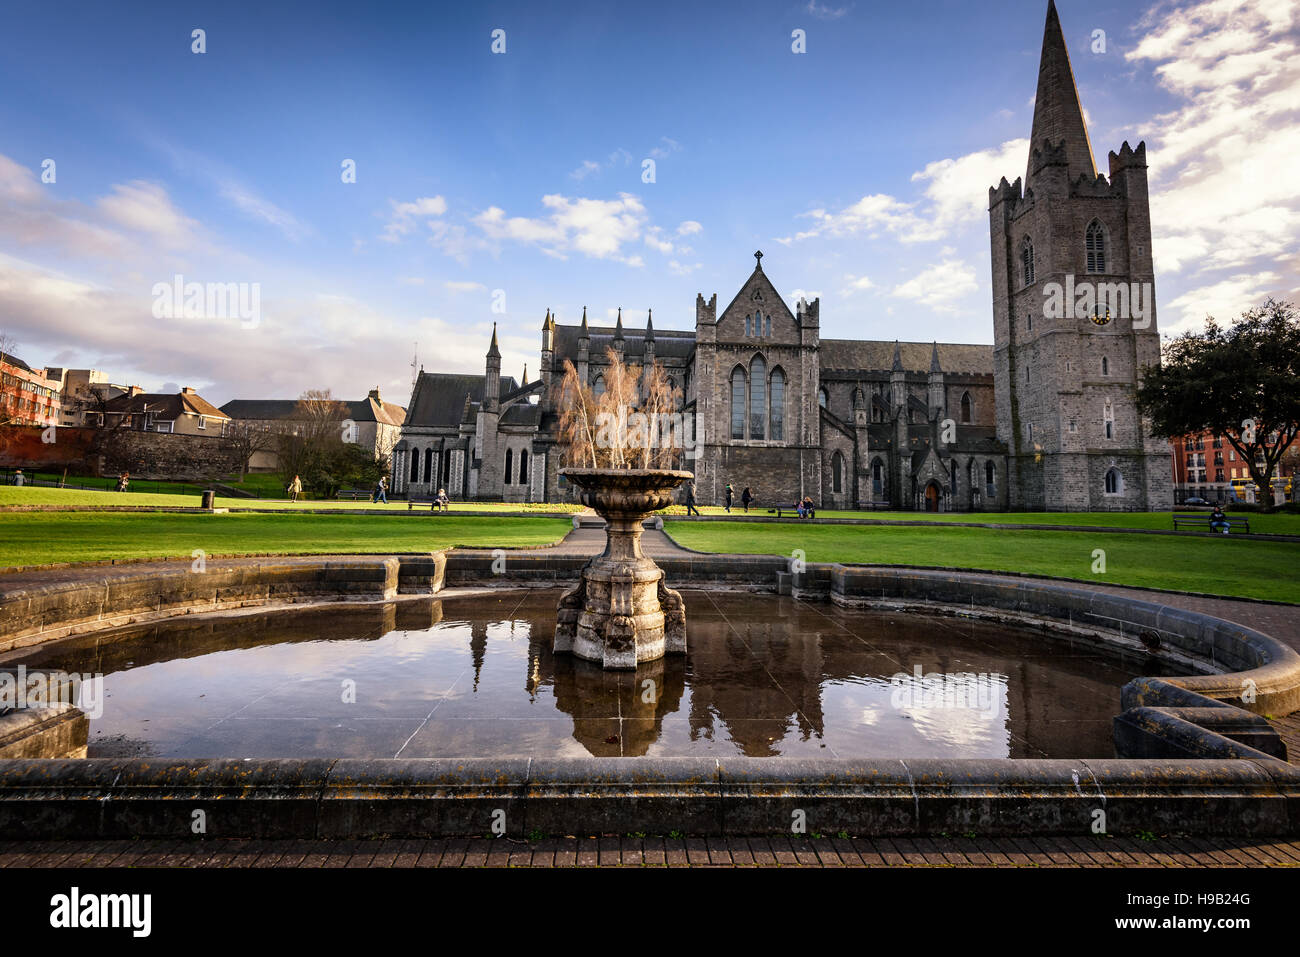 Saint Patrick's Cathedral in Dublin, also known as The National Cathedral and Collegiate Church of Saint Patrick, Dublin. Stock Photo